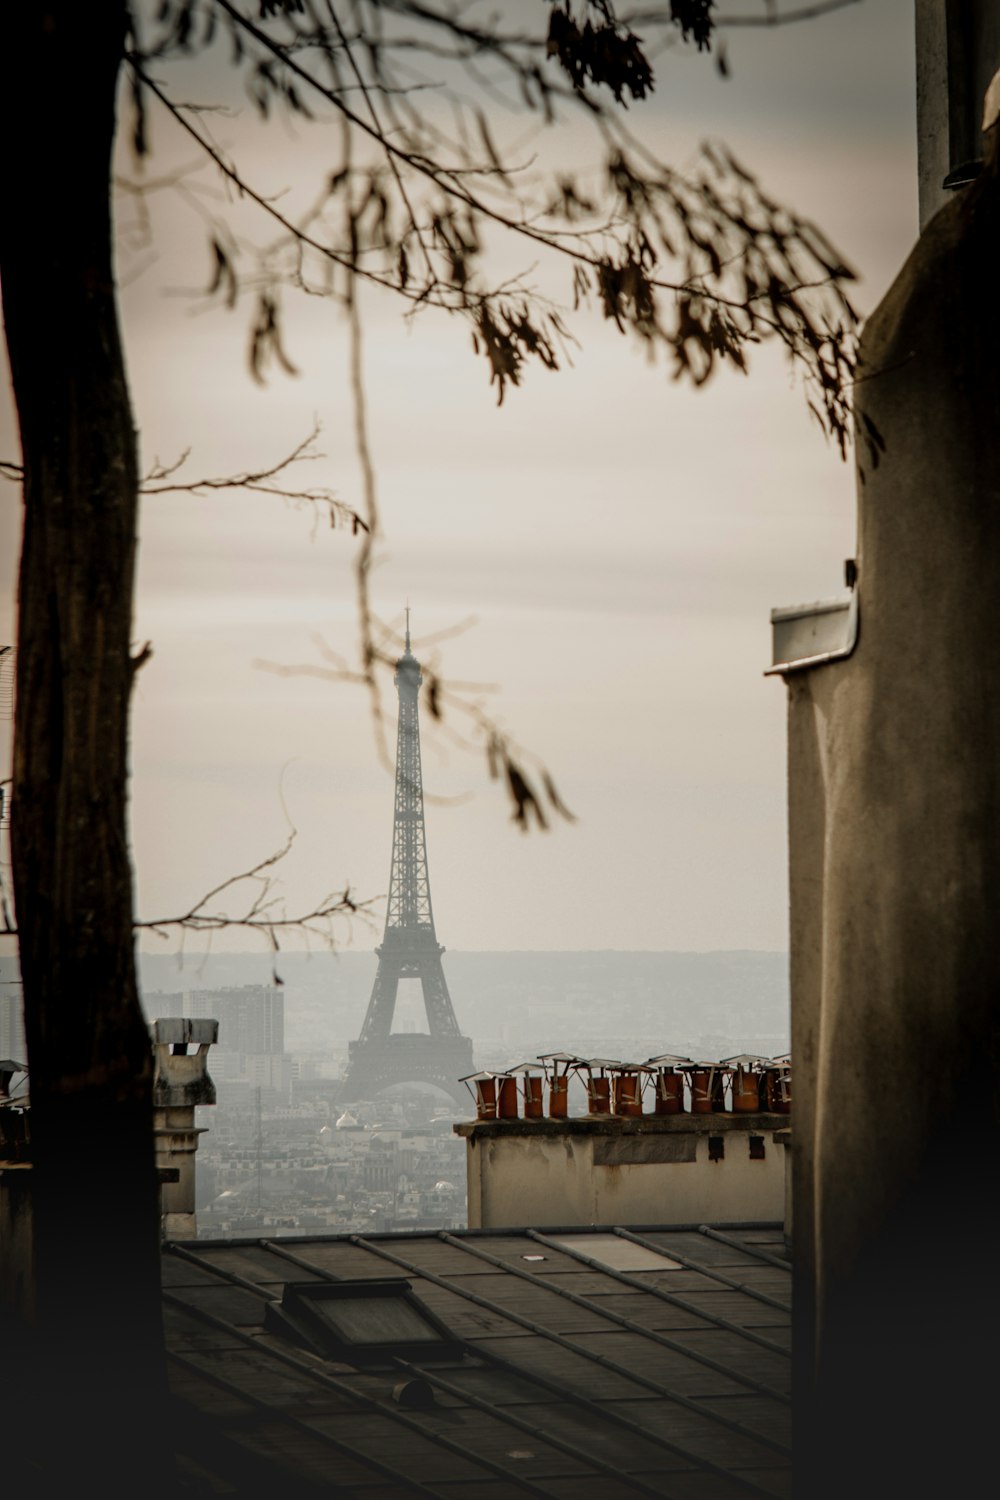 a view of the eiffel tower from the roof of a building